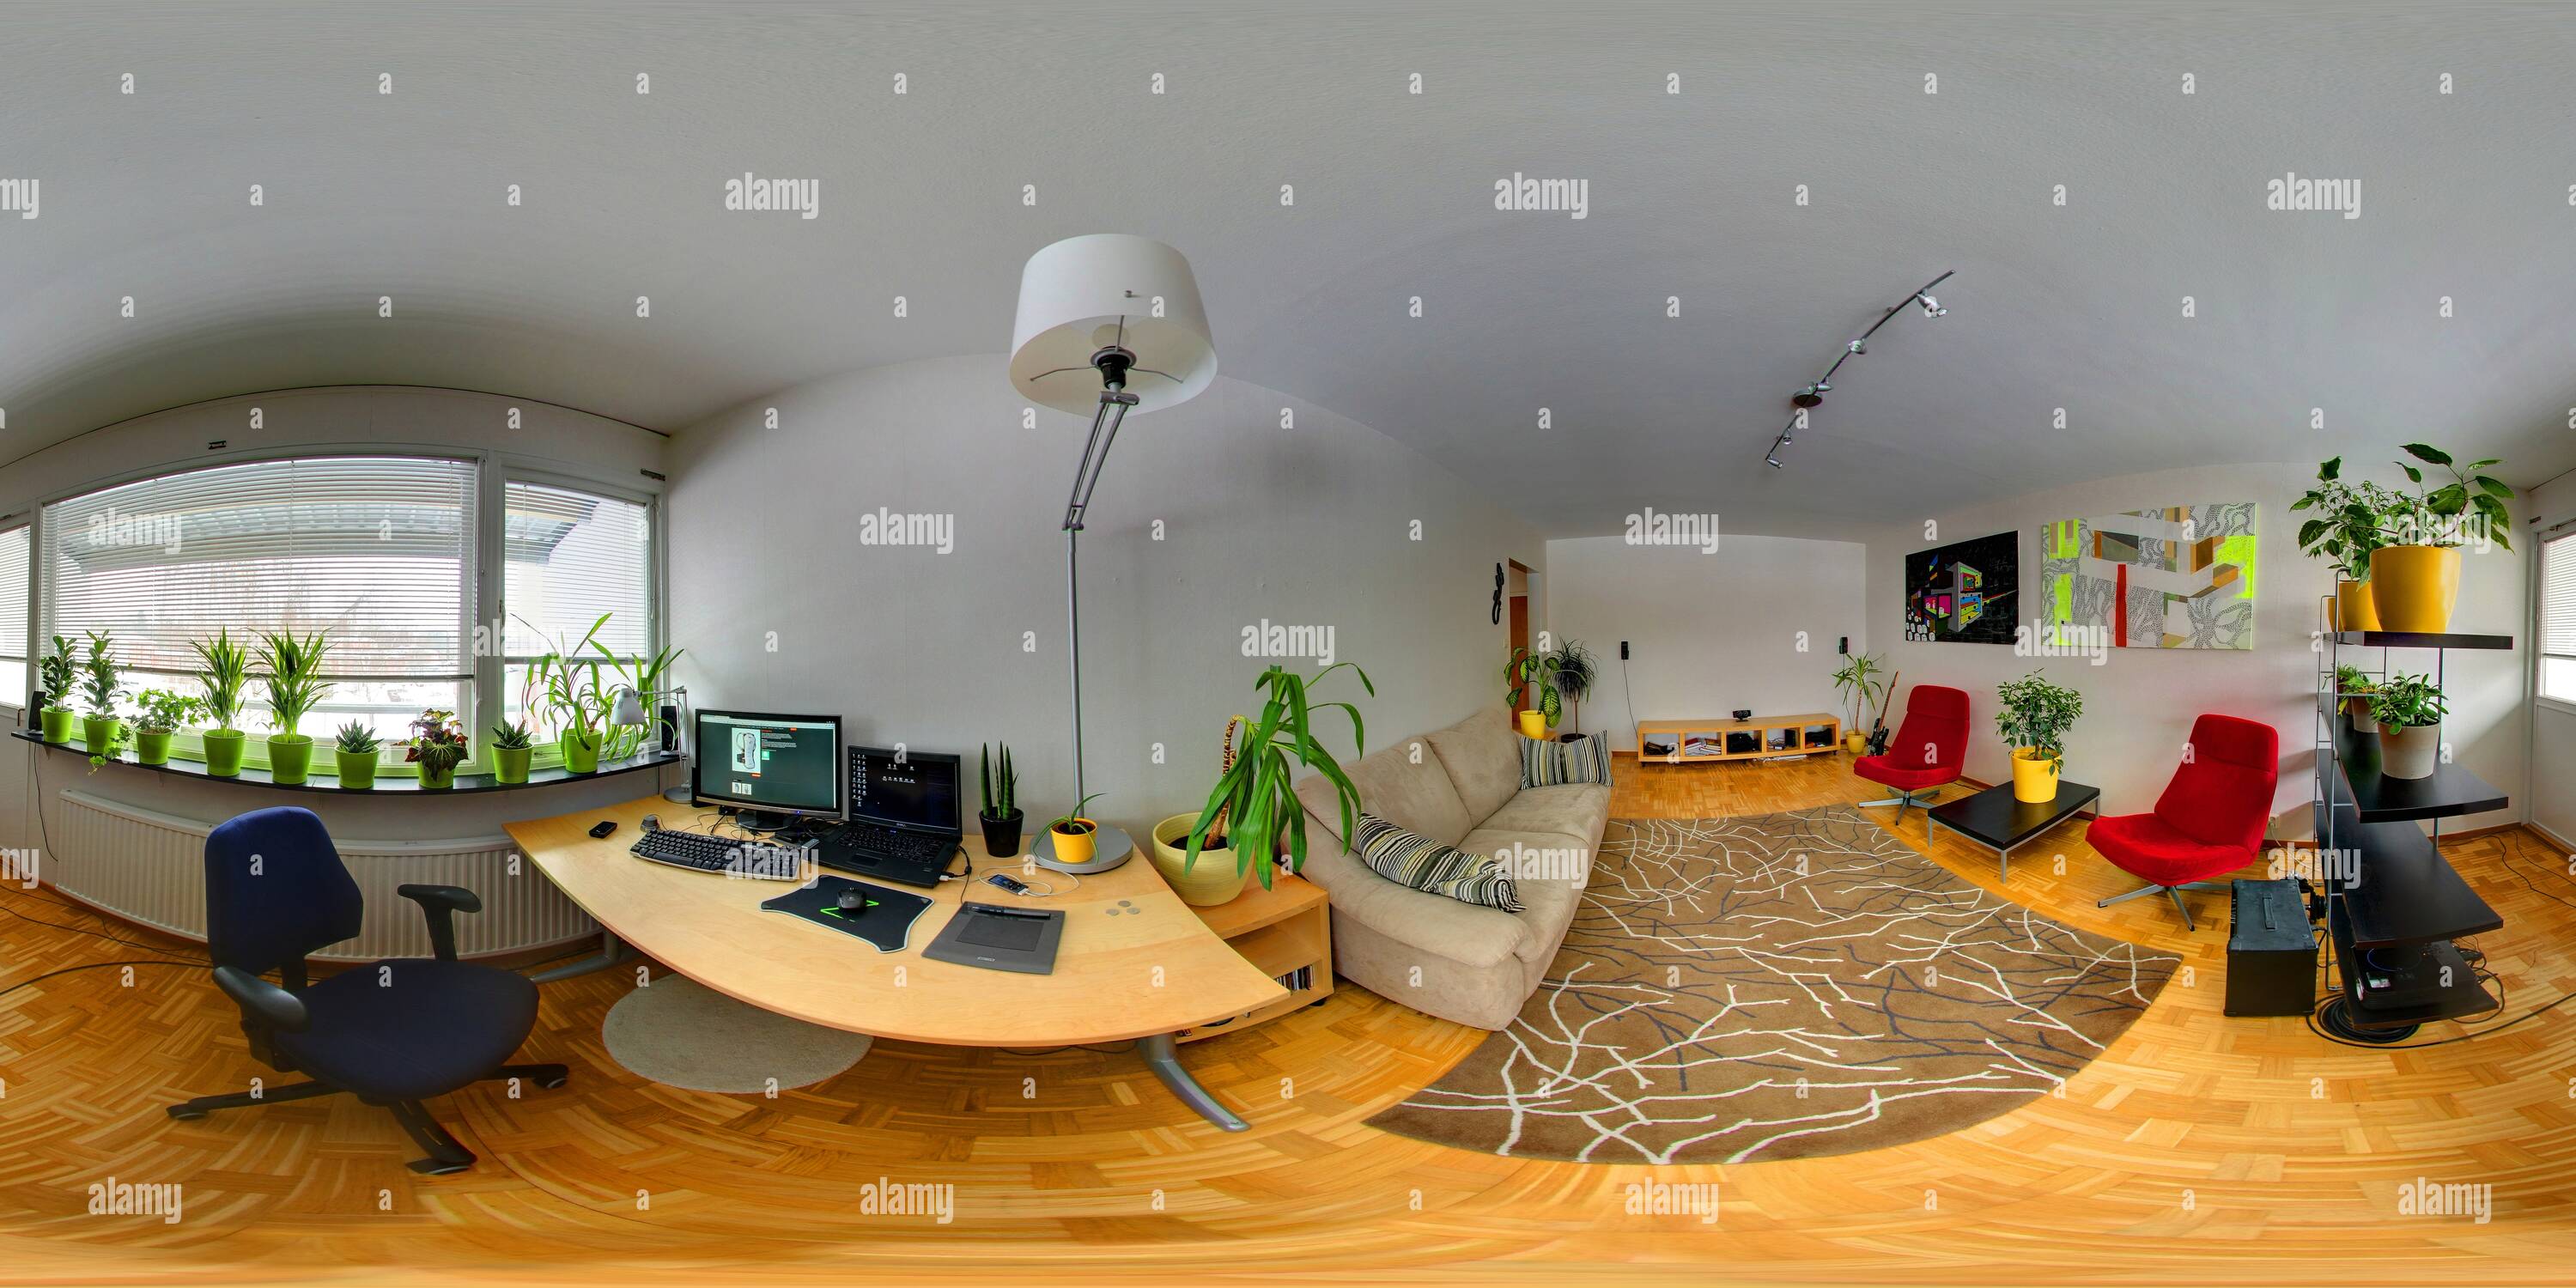 360 degree panoramic view of One livingroom in Almhult 2010